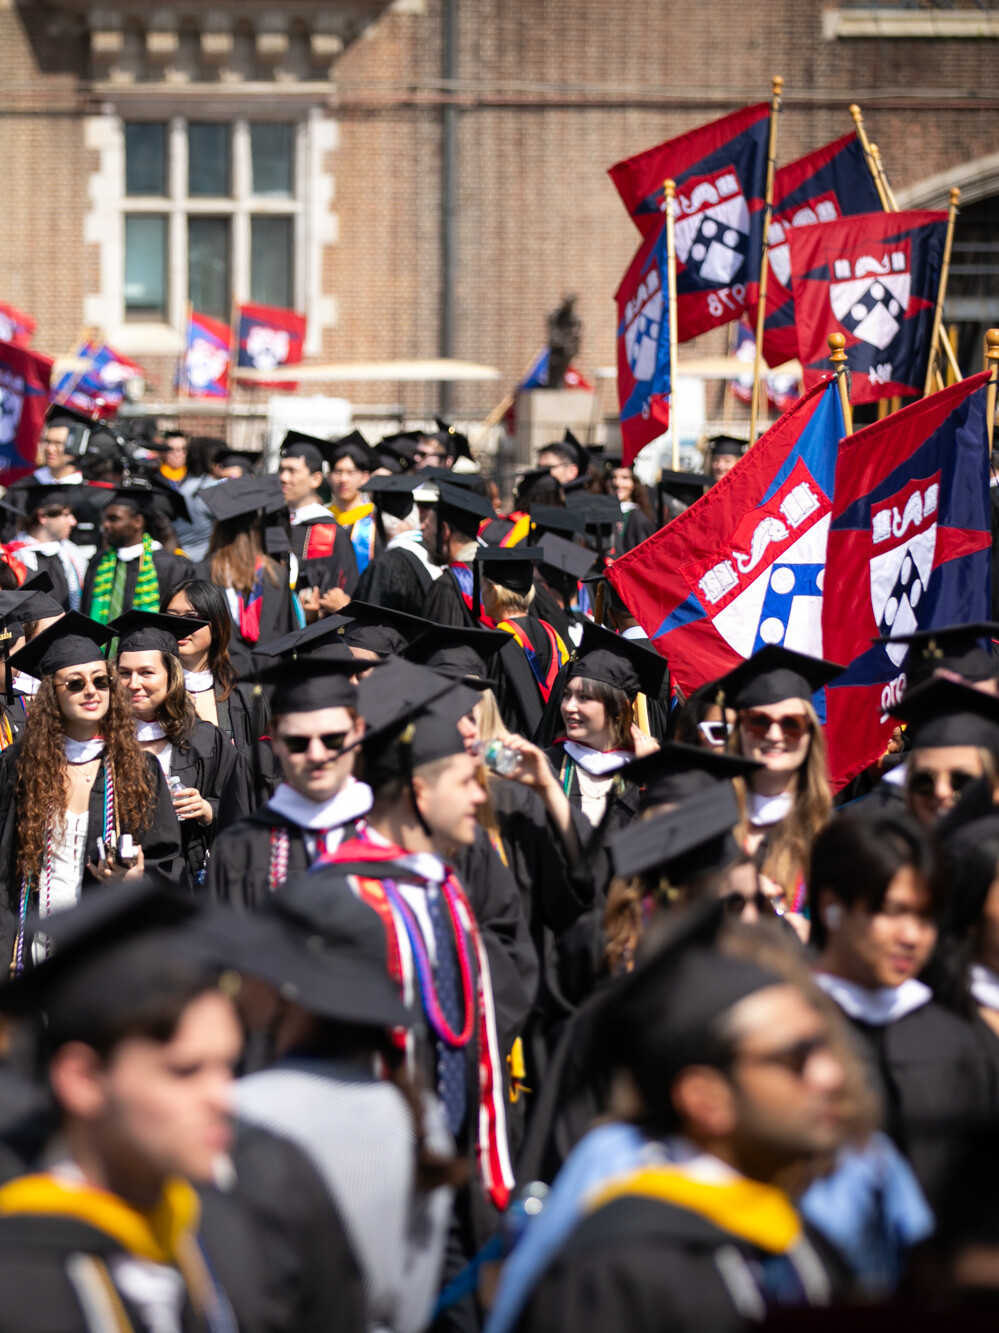 penn students celebrate during commencement